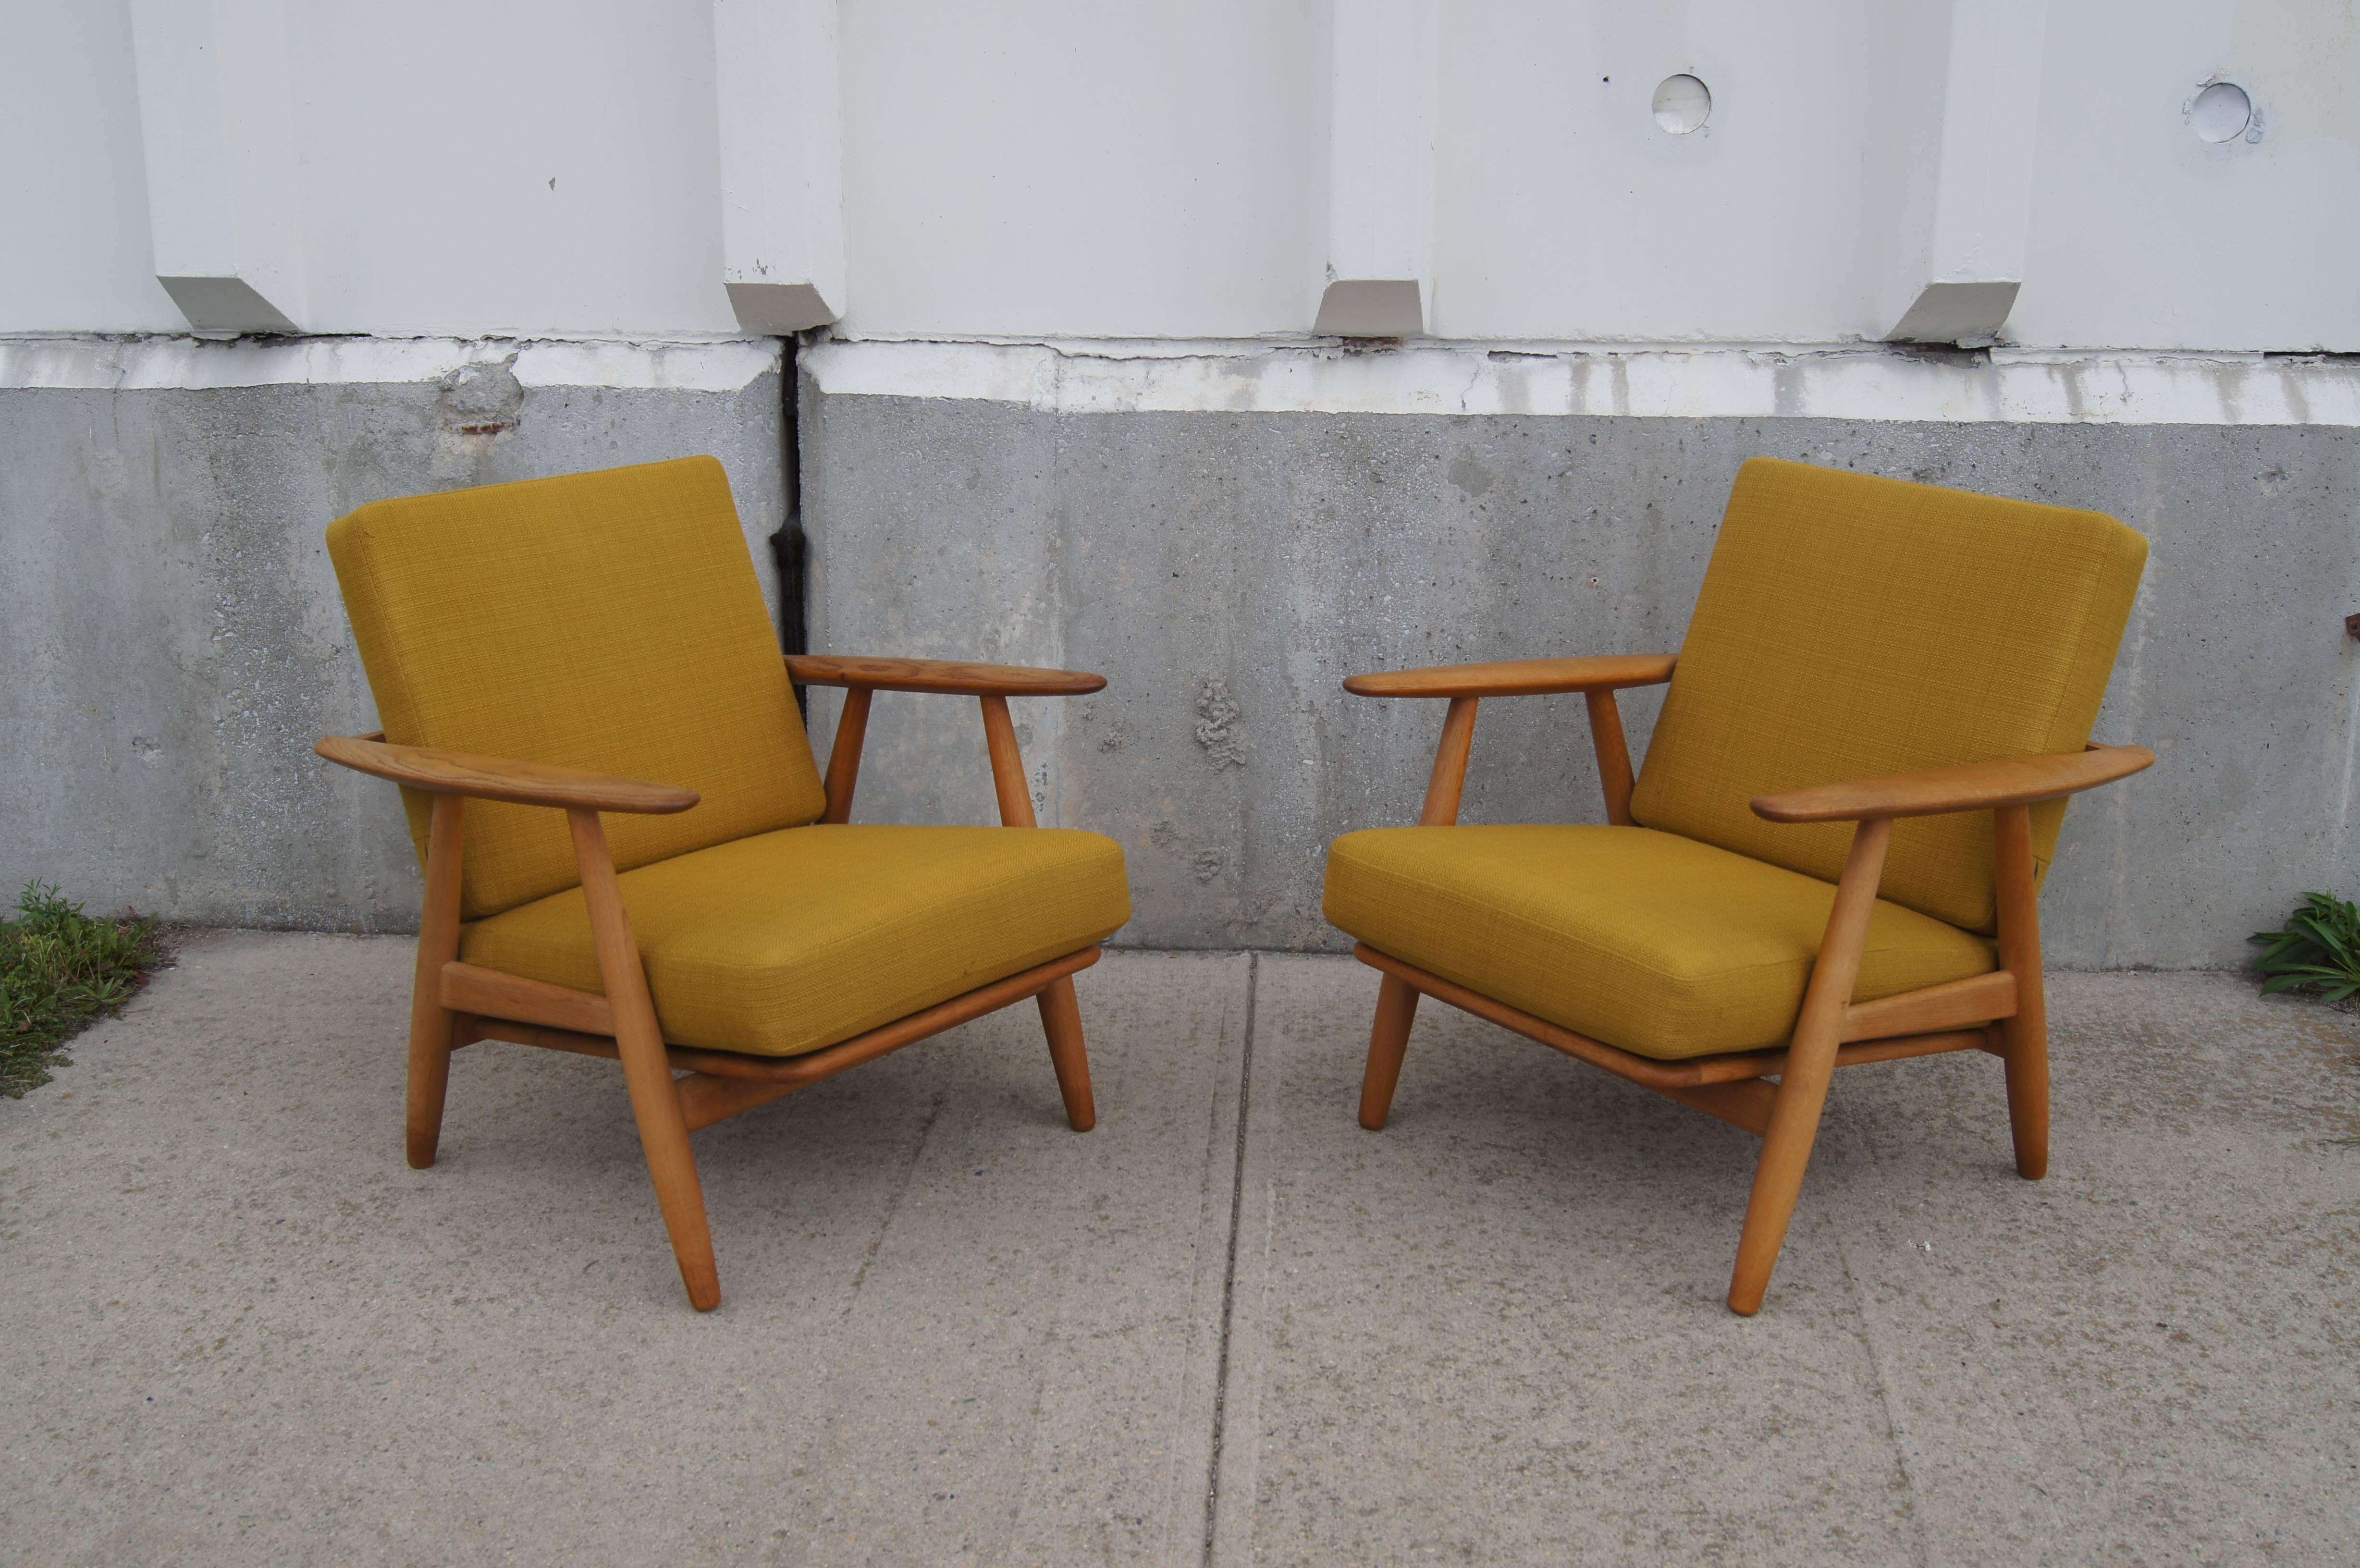 Hans Wegner designed the GE240 in 1955 for GETAMA. The gently curved lines of the armrests inspired the name Cigar chair. These comfortable armchairs have a lovely oak frames and their original sprung cushions in a yellow-green textile.